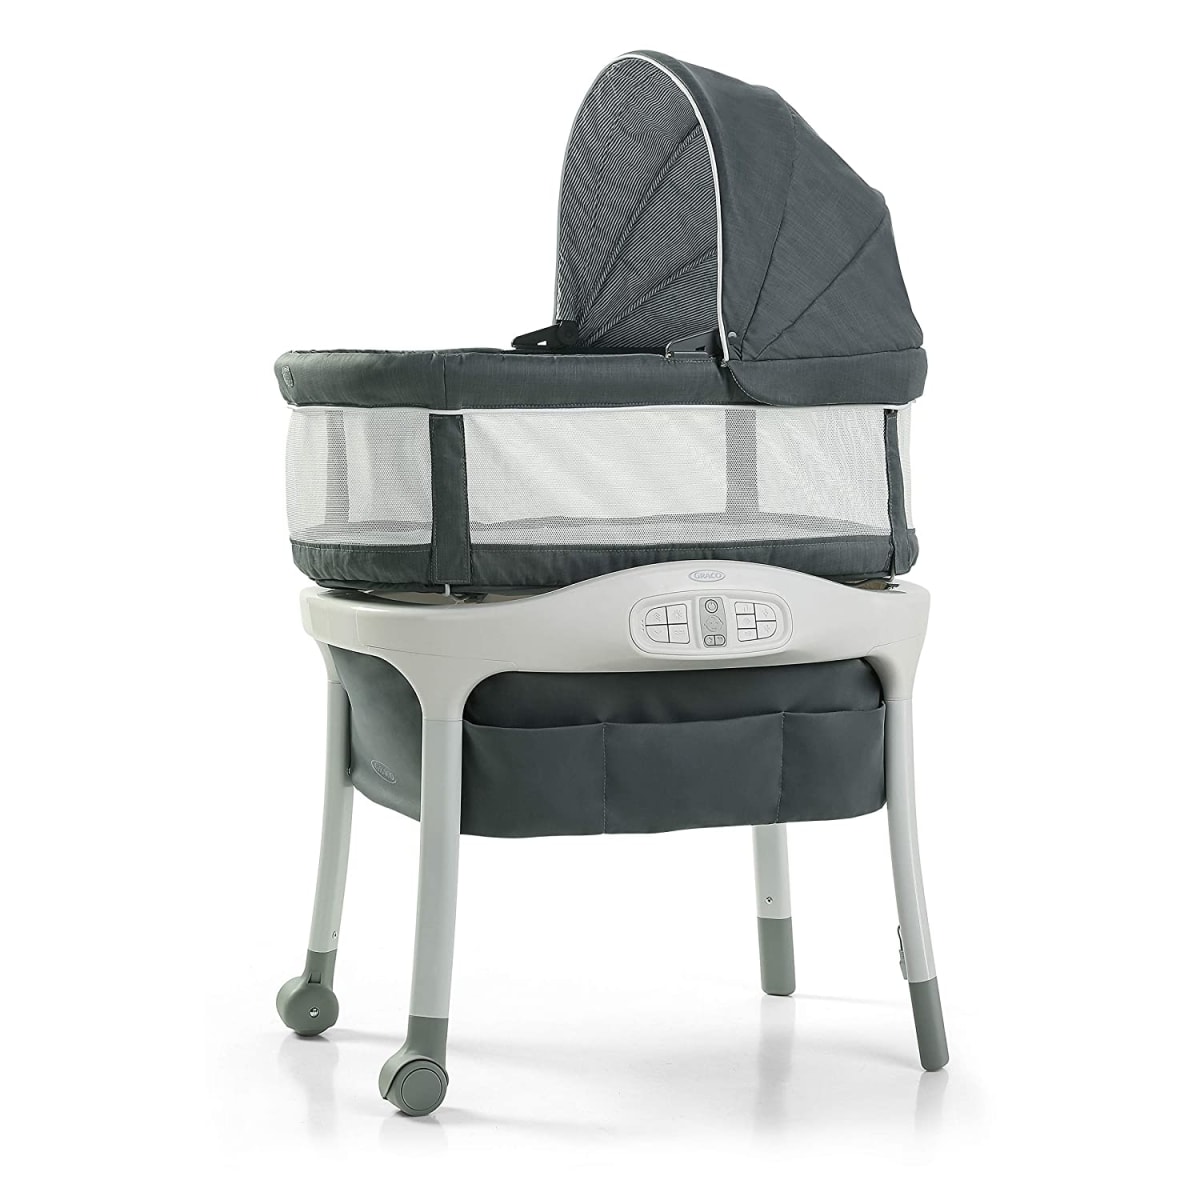 Sense2Snooze Bassinet with Cry Detection Technology